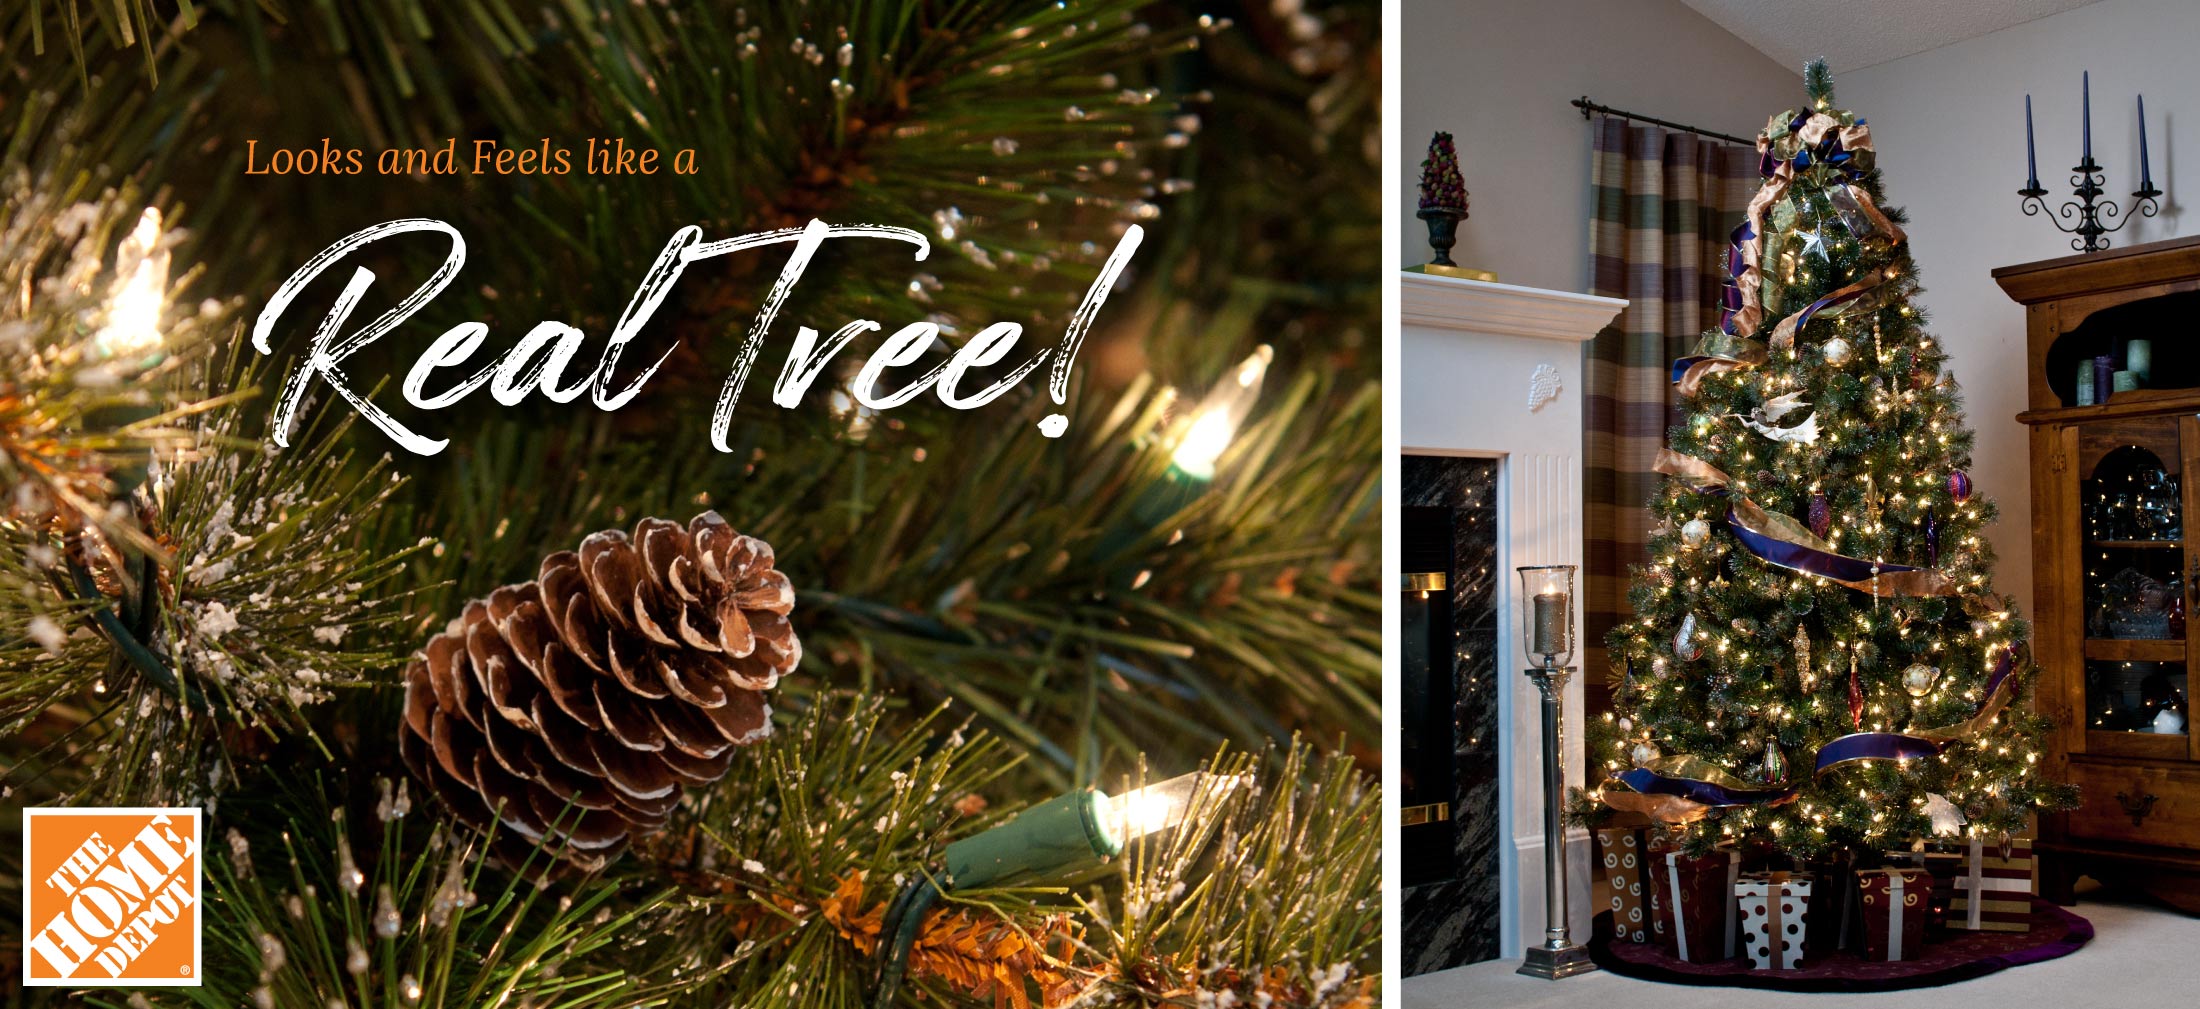 Environmental product photography inside a home showing Christmas trees faraway and closeup